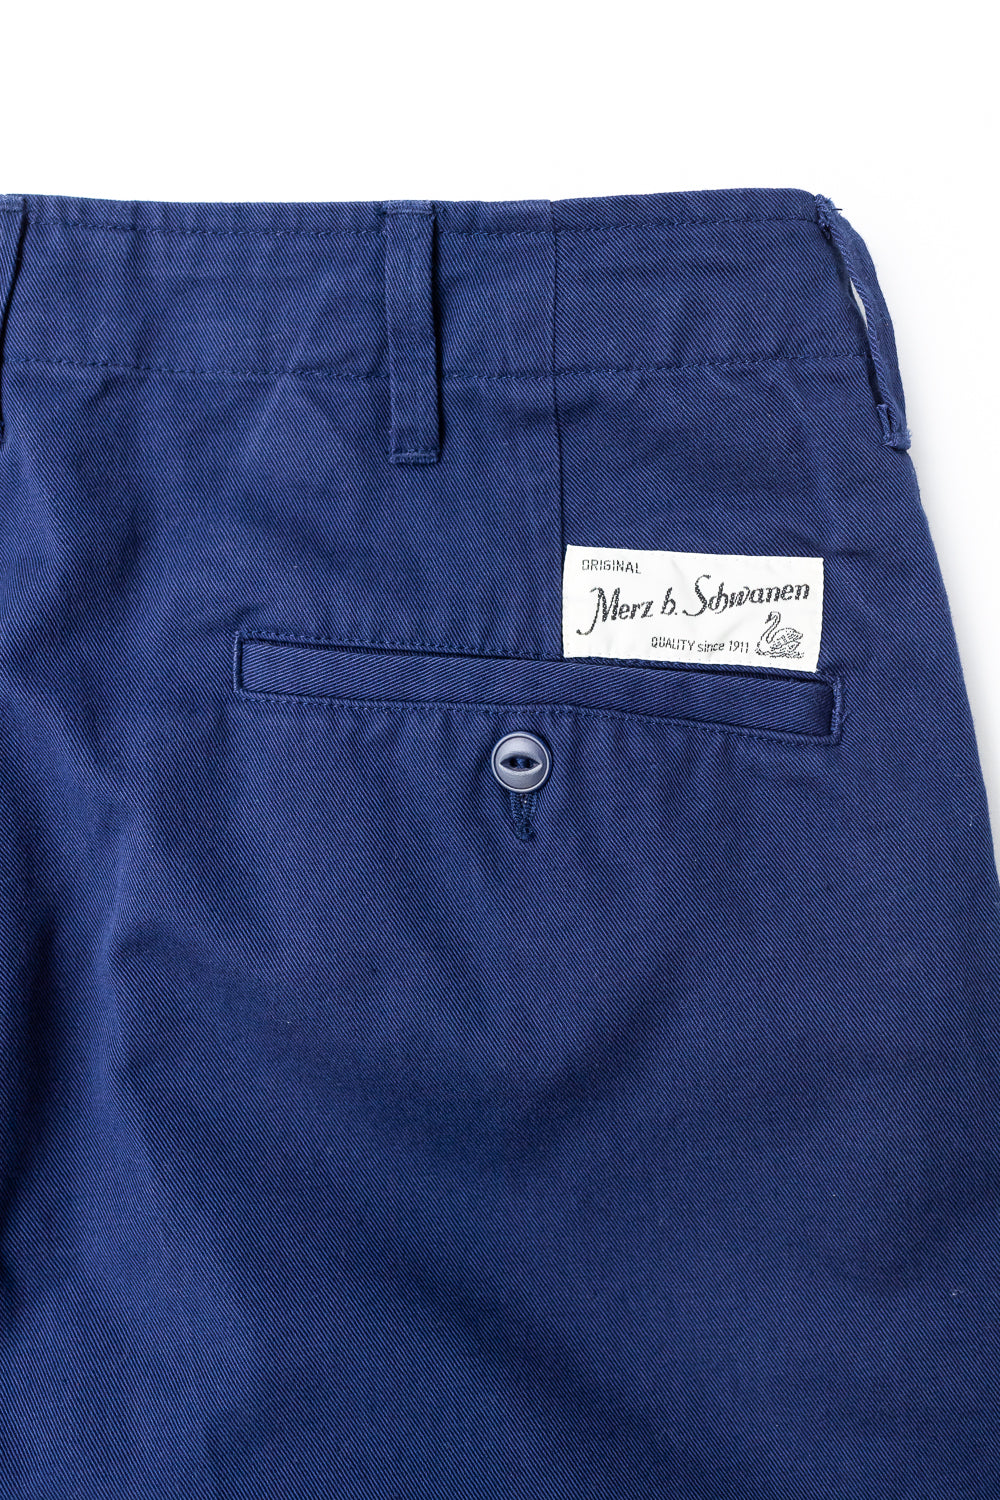 CHINO01.66 - 9.2oz Organic Cotton Twill Chino Relaxed Fit - Ink Blue